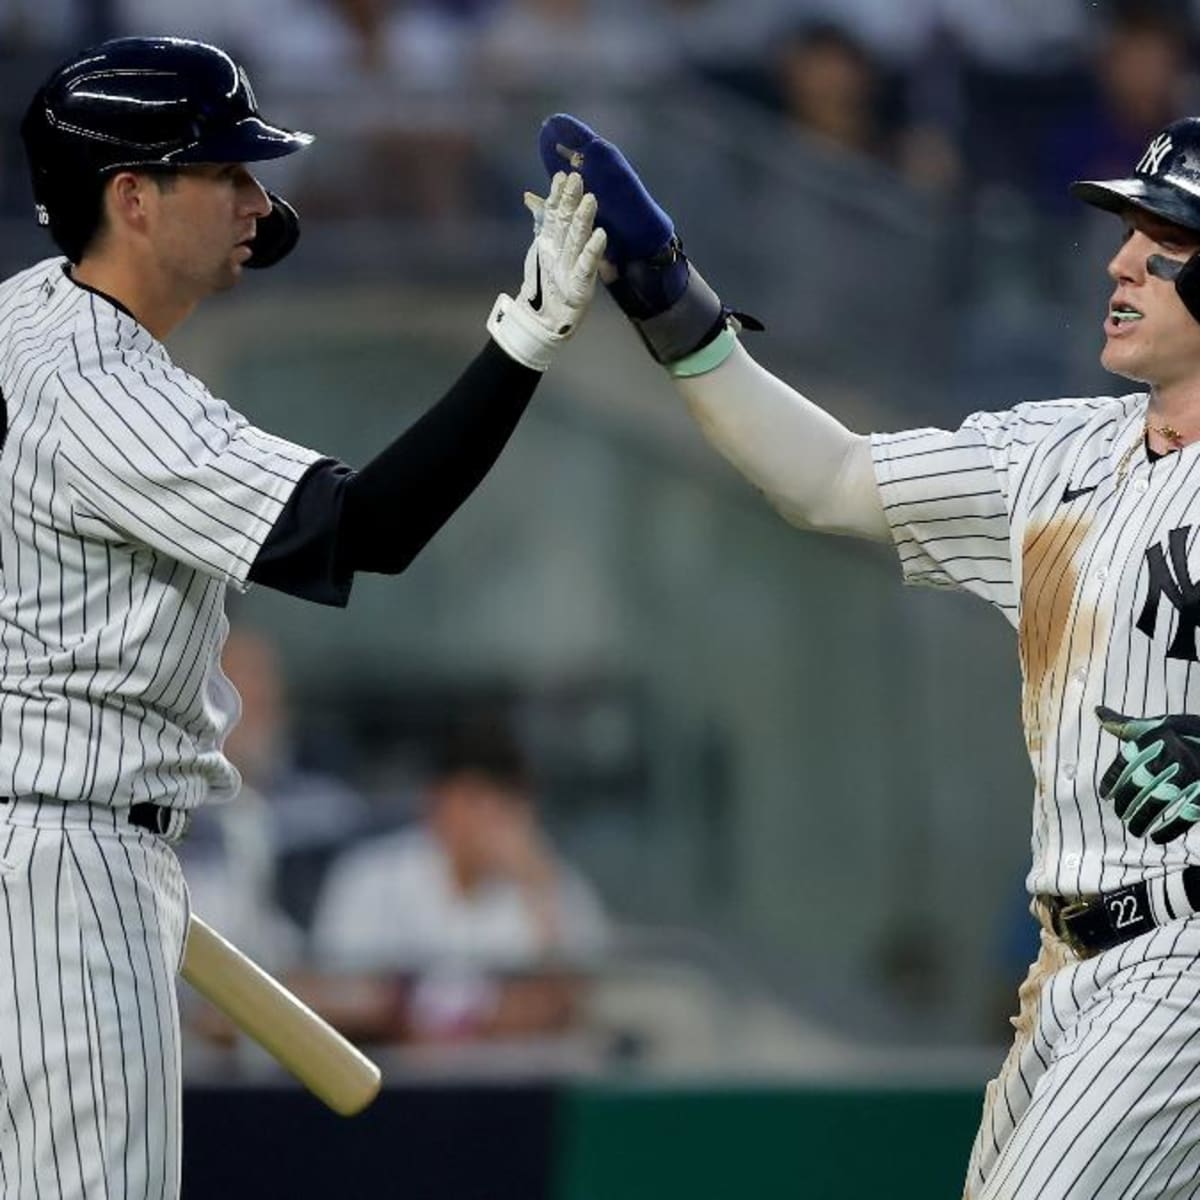 Struggling NY Yankees Slugger, Draws Interest From Three Teams, Less Than  48 Hours From Trade Deadline, After Admitting He 'Didn't Play Well as a  Yankee' - EssentiallySports